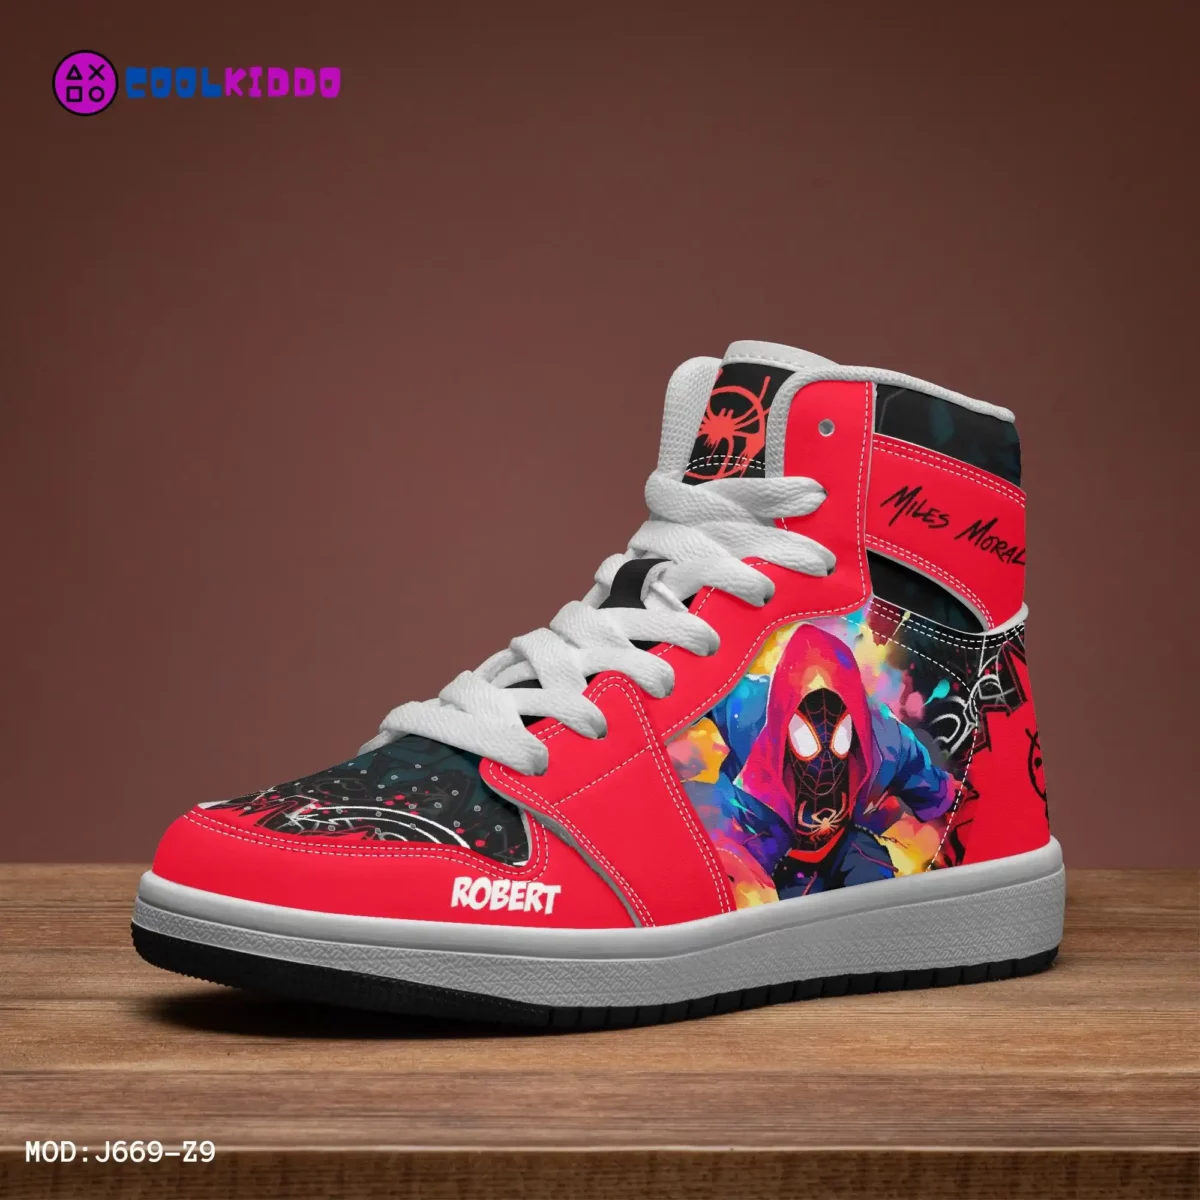 Personalized Spiderman Sneakers for Kids | Miles Morales Spider Verse Character High-Top Leather Black and Red Shoes Cool Kiddo 20